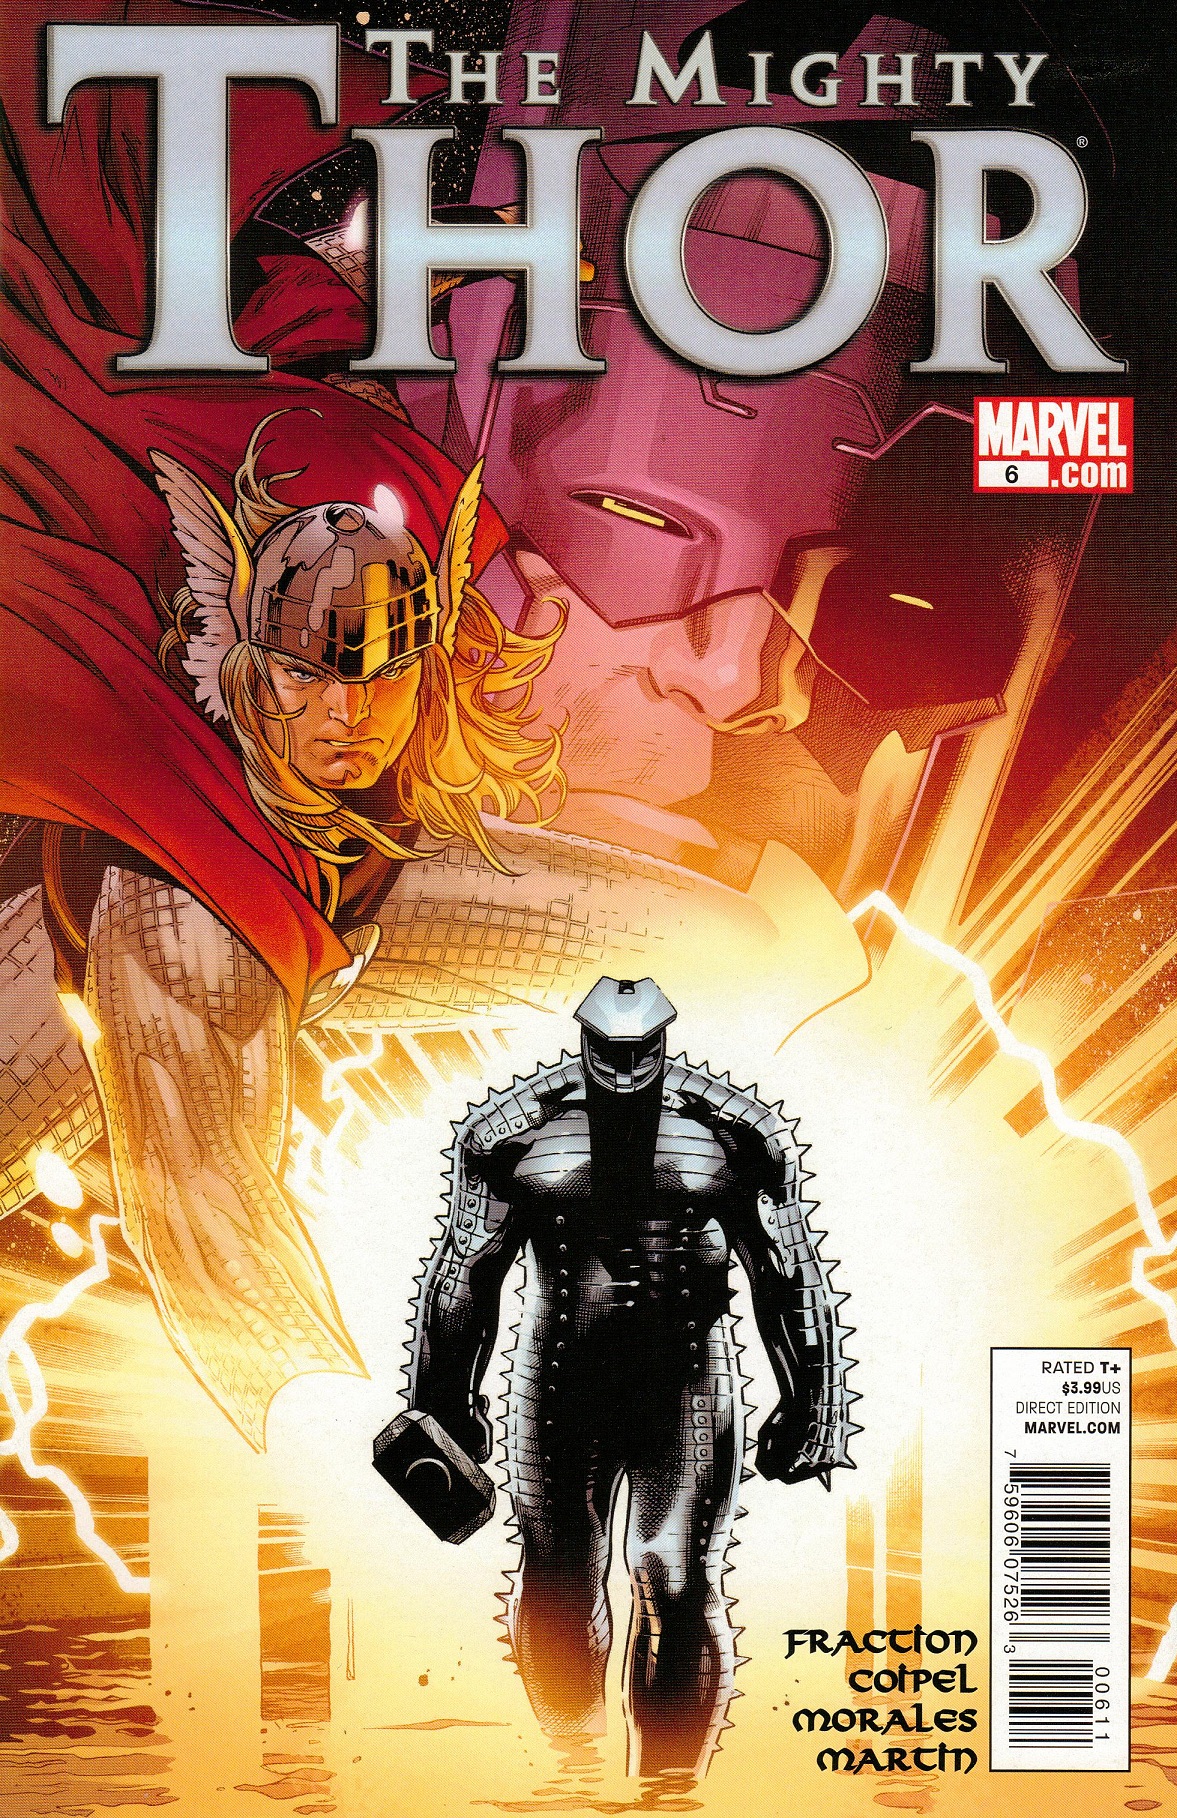 The Mighty Thor Vol. 1 #6A